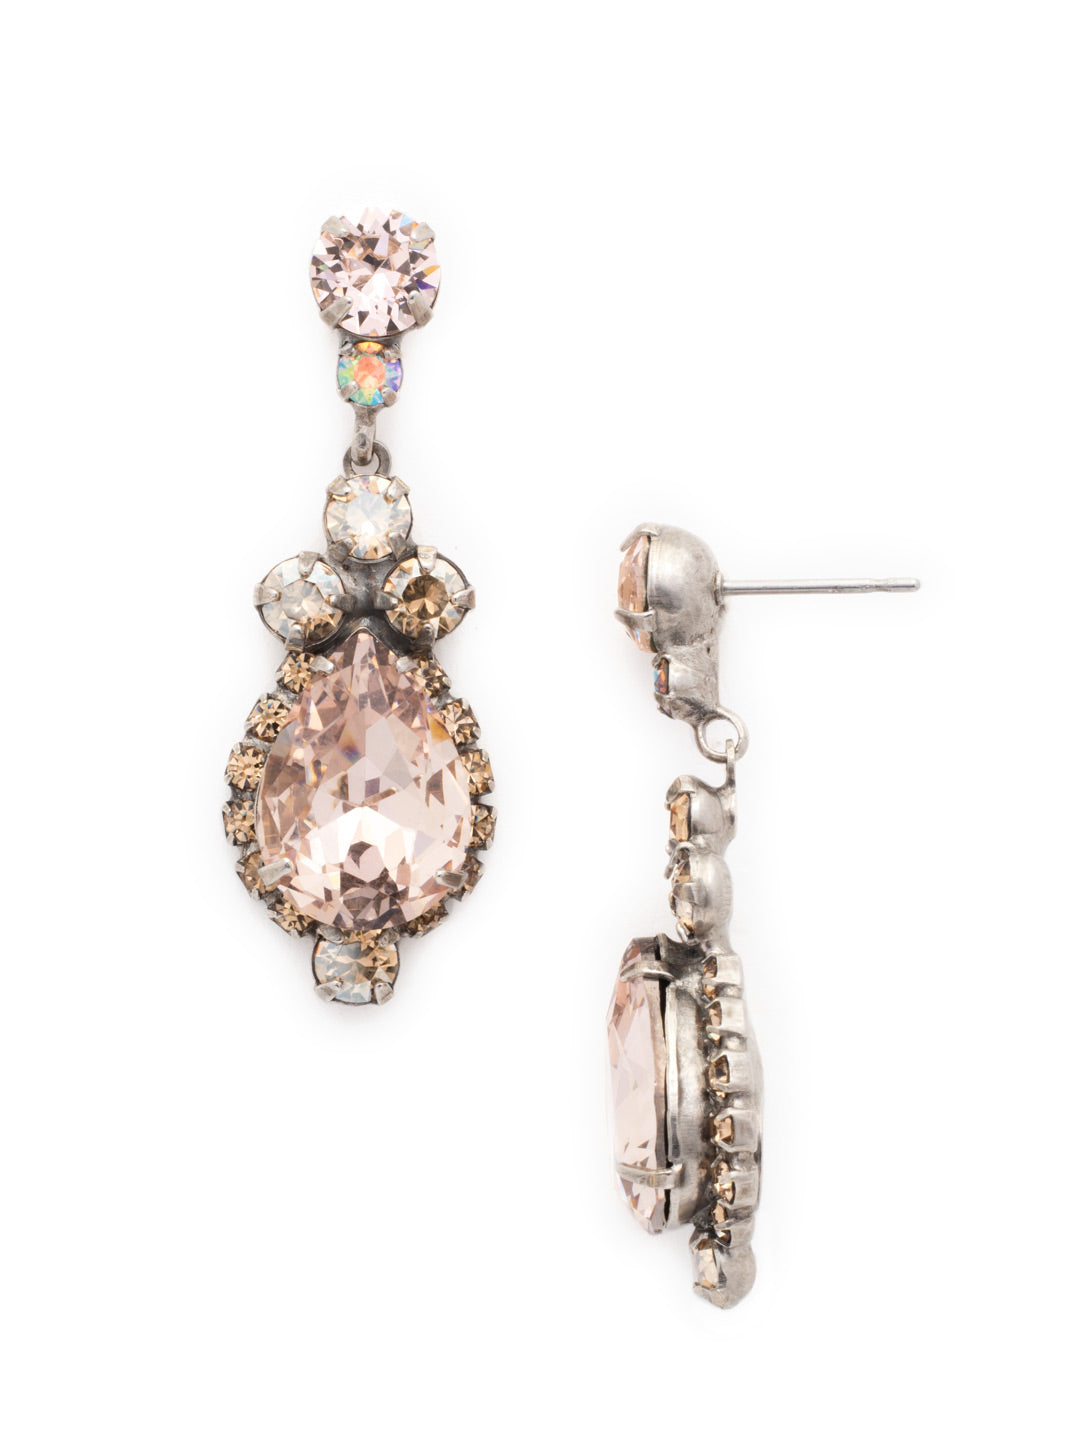 Central Teardrop and Round Crystal Dangle Earrings - EDA55ASSND